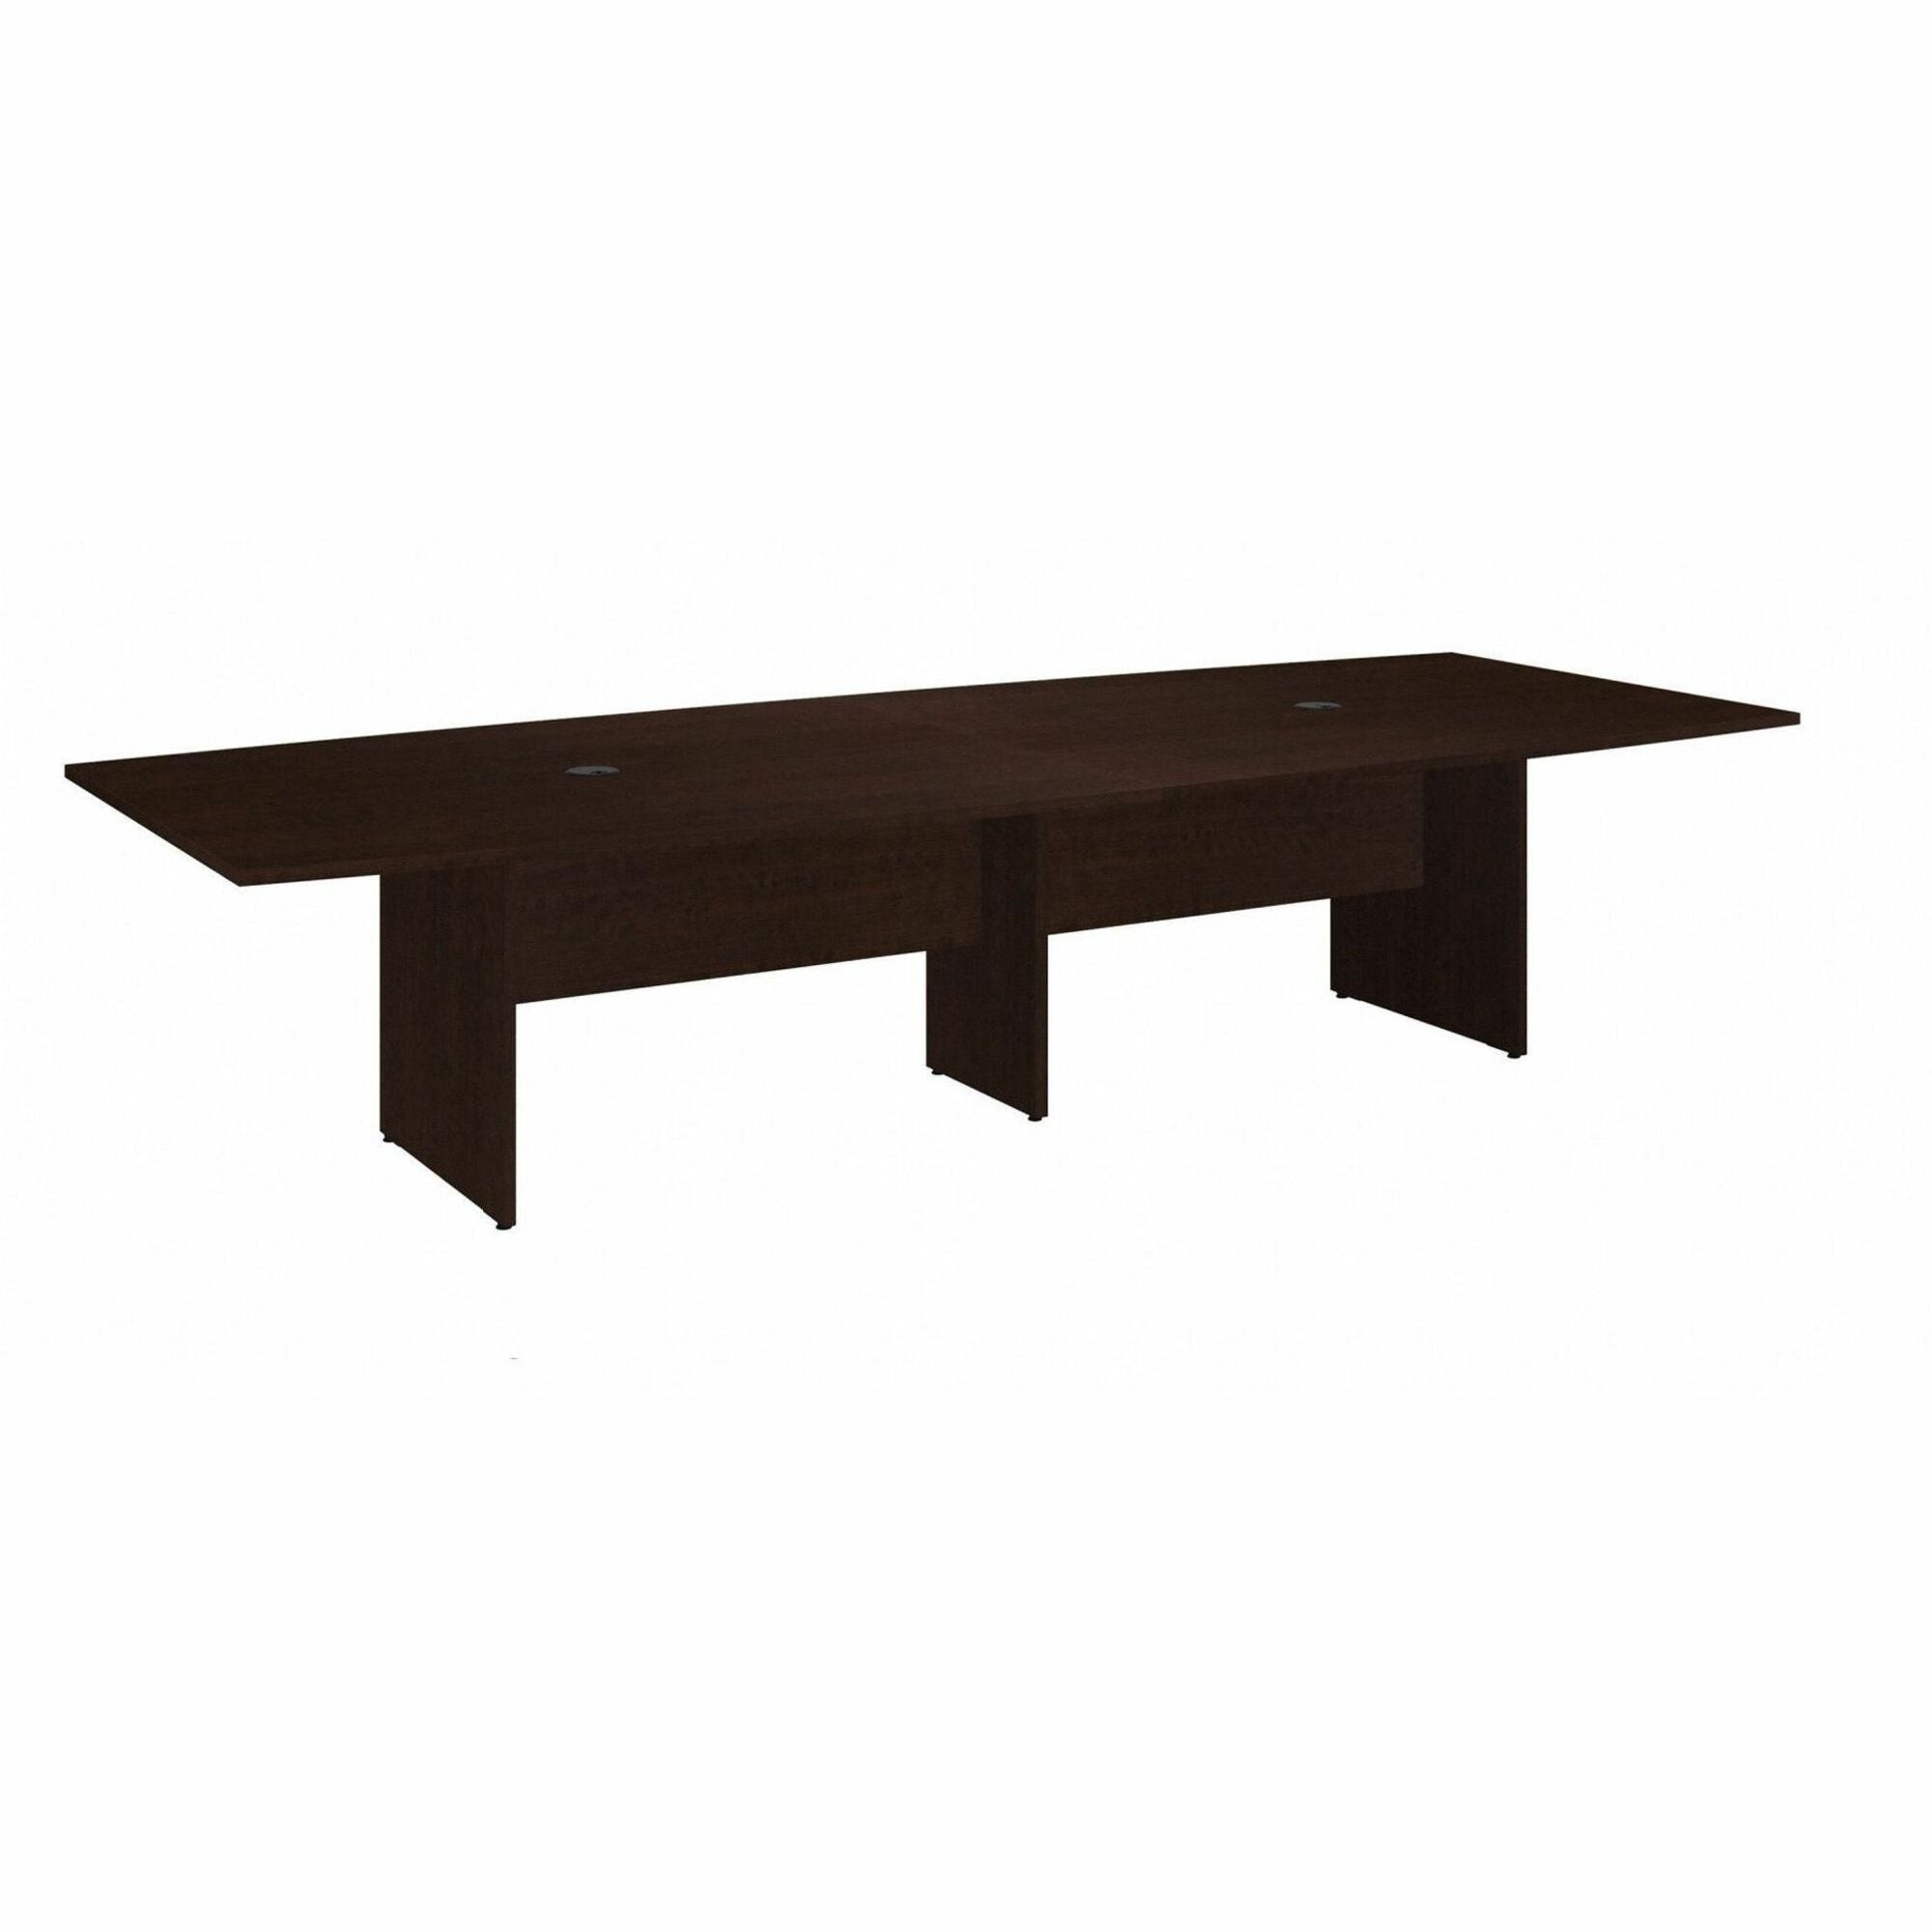 Bush Business Furniture 120L x 48W Boat Top Conference Table - Mocha Cherry - For - Table TopBoat Top - 3 Legs x 47.52" Table Top Width x 119.21" Table Top Depth x 1" Table Top Thickness - 28.65" Height - Assembly Required - Mocha Cherry, Thermofused - 1